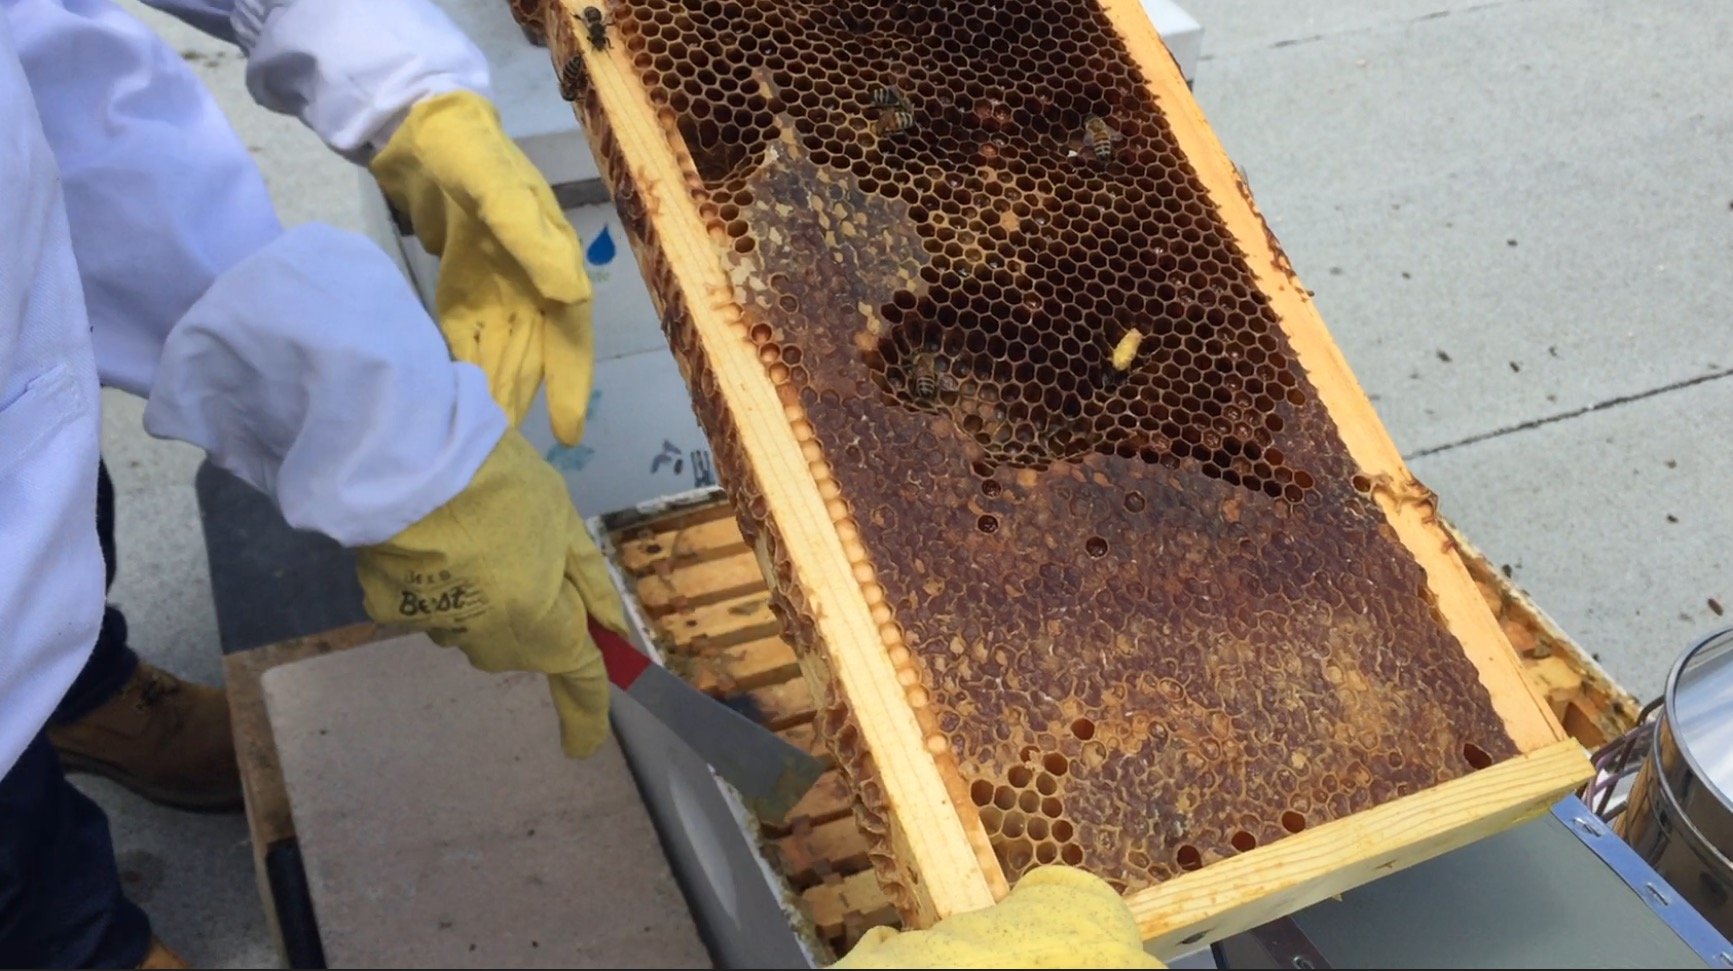 Last season the hives at DC Water's Blue Plains plant produced 150 pounds of honey. (WTOP/Kristi King)